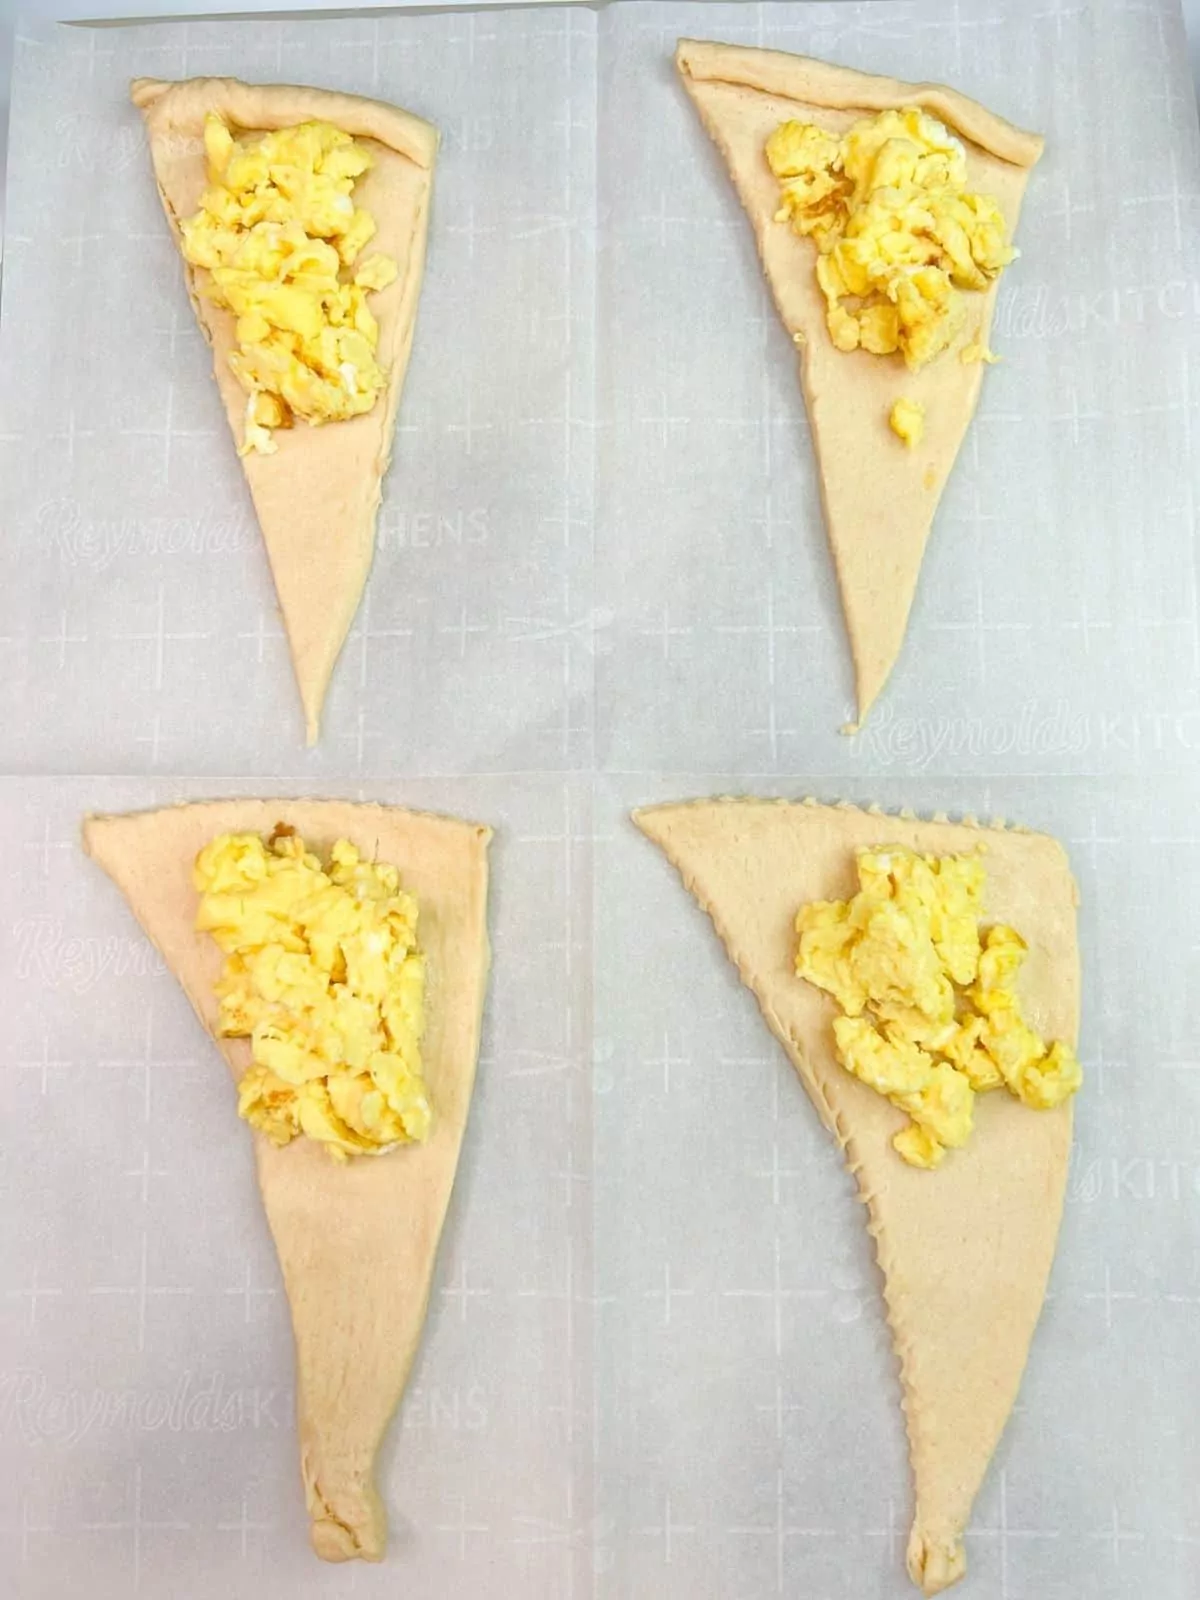 crescent roll triangles with scrambled eggs.